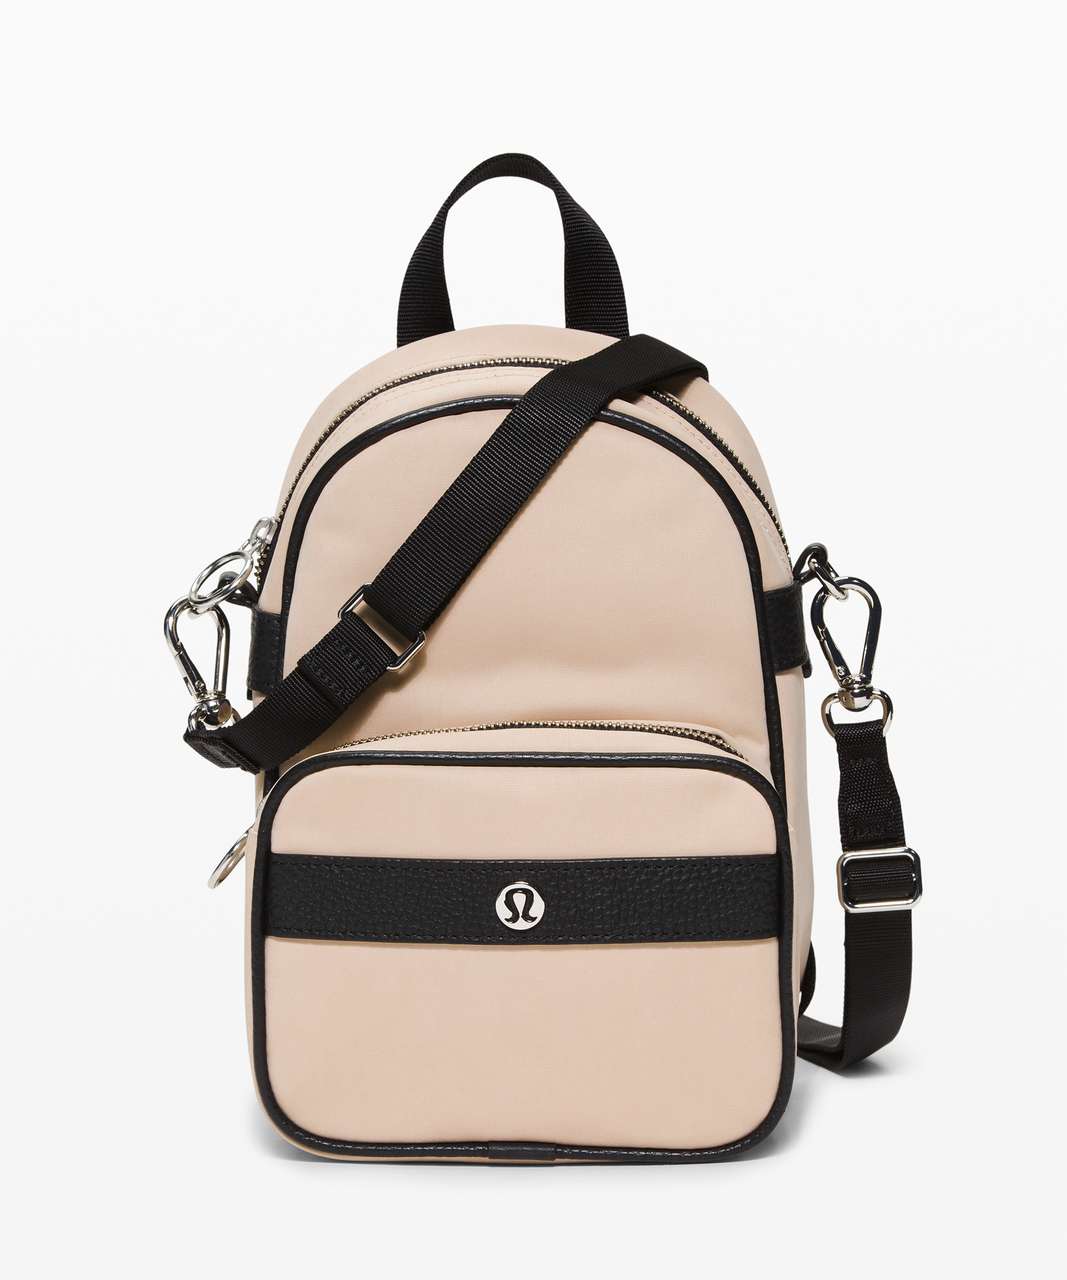 Lululemon Now and Always Convertible Bag *Mini - Locarno